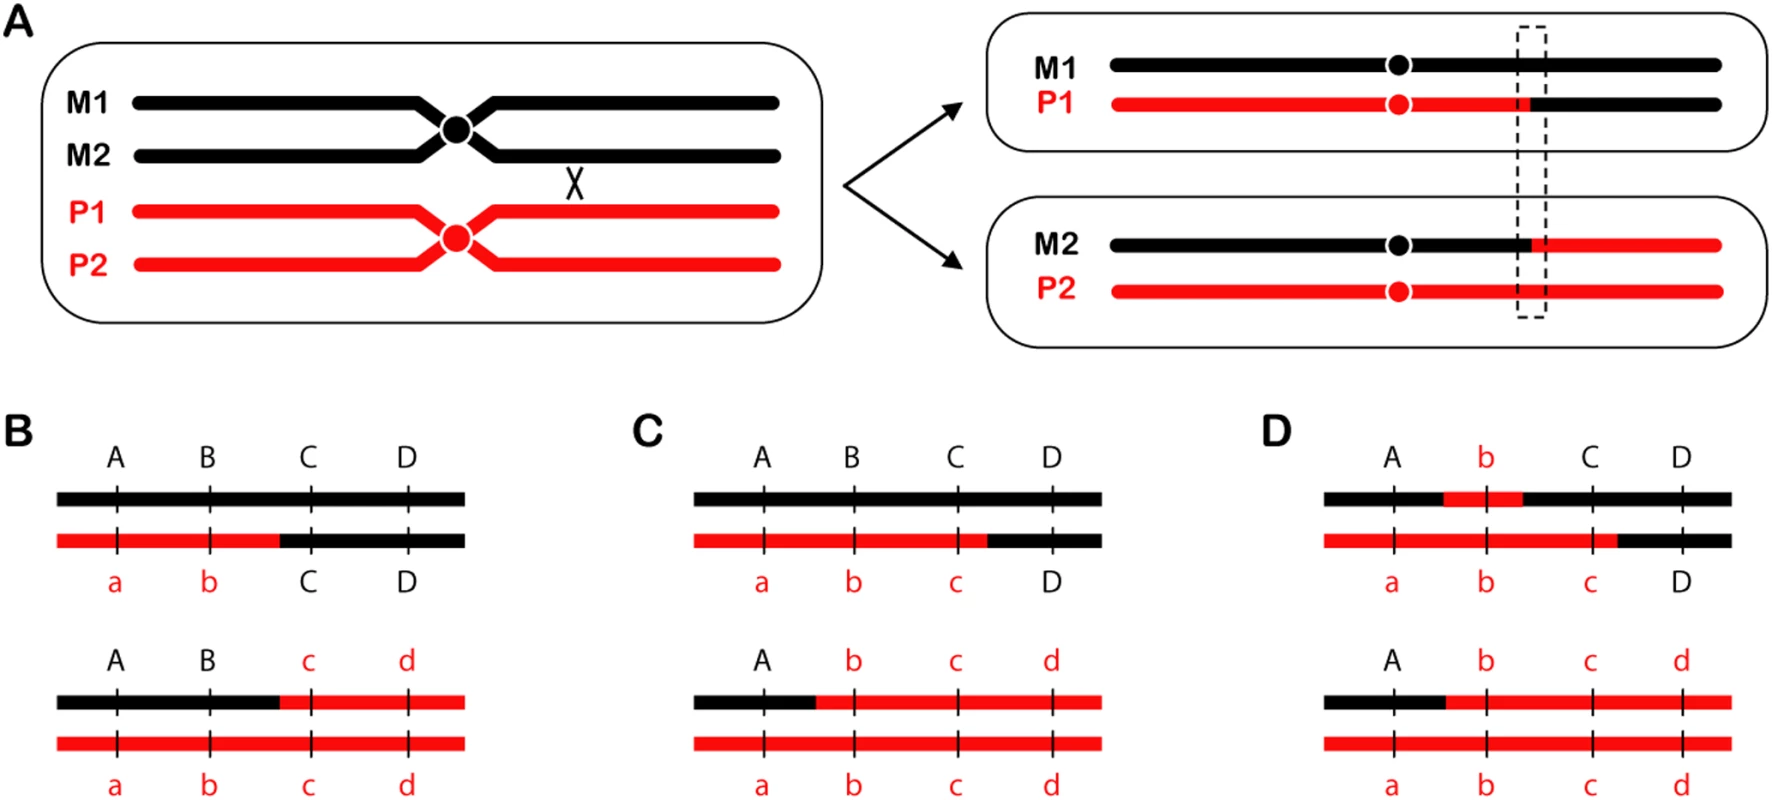 Reciprocal crossovers and gene conversion.